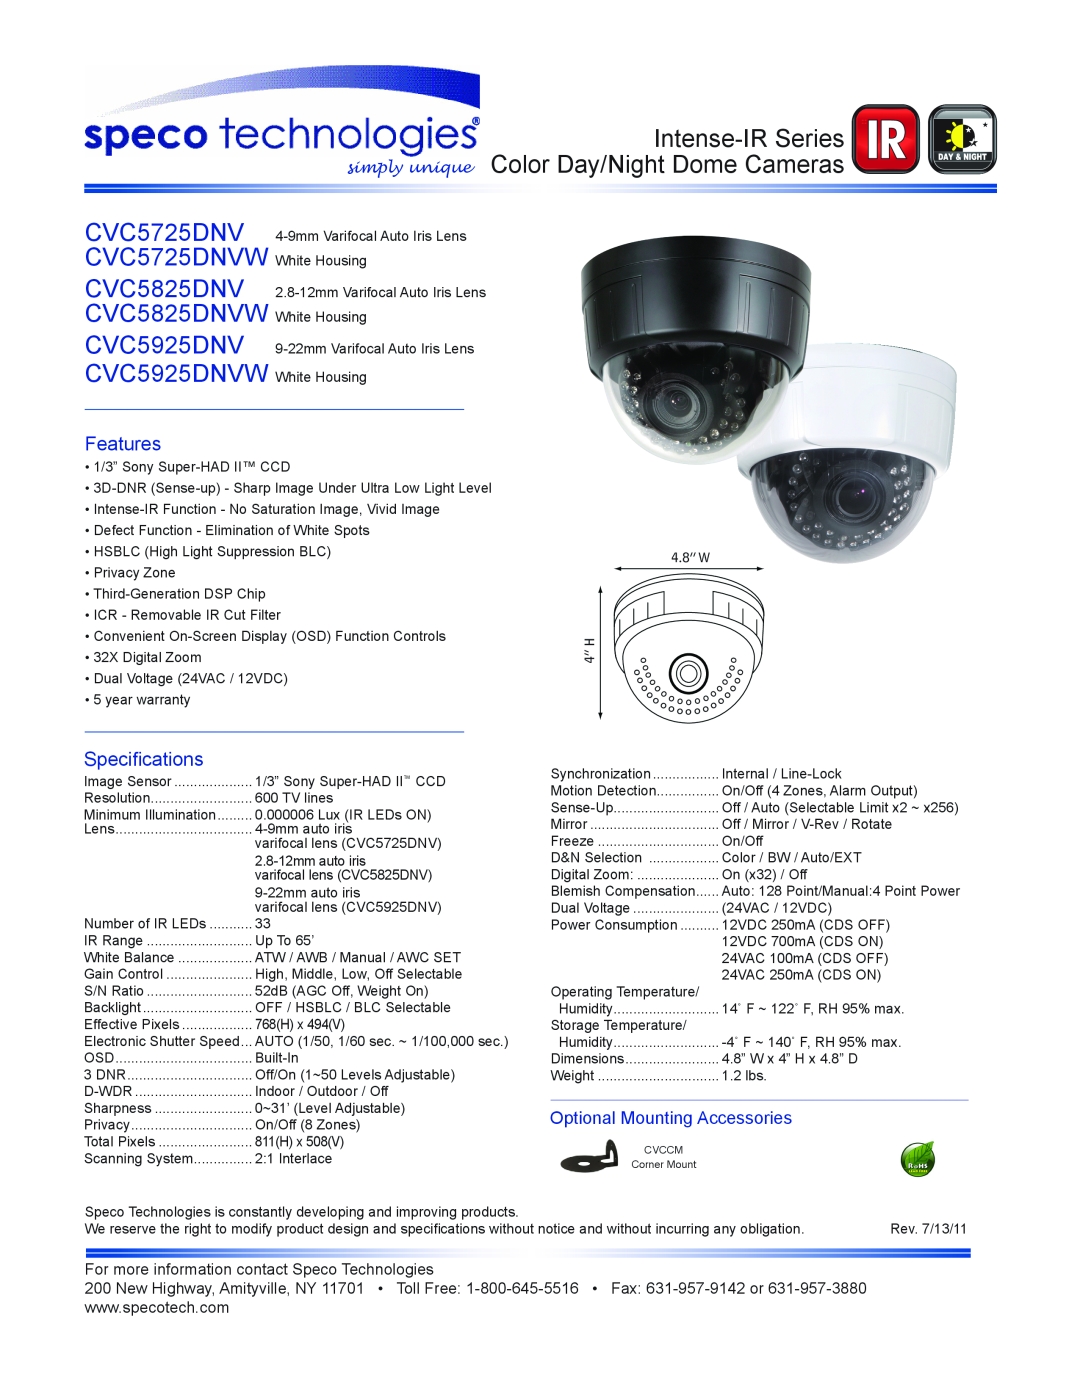 Speco Technologies CVC5925DNV warranty Intense-IR Series, simply unique Color Day/Night Dome Cameras, Features, Lens 